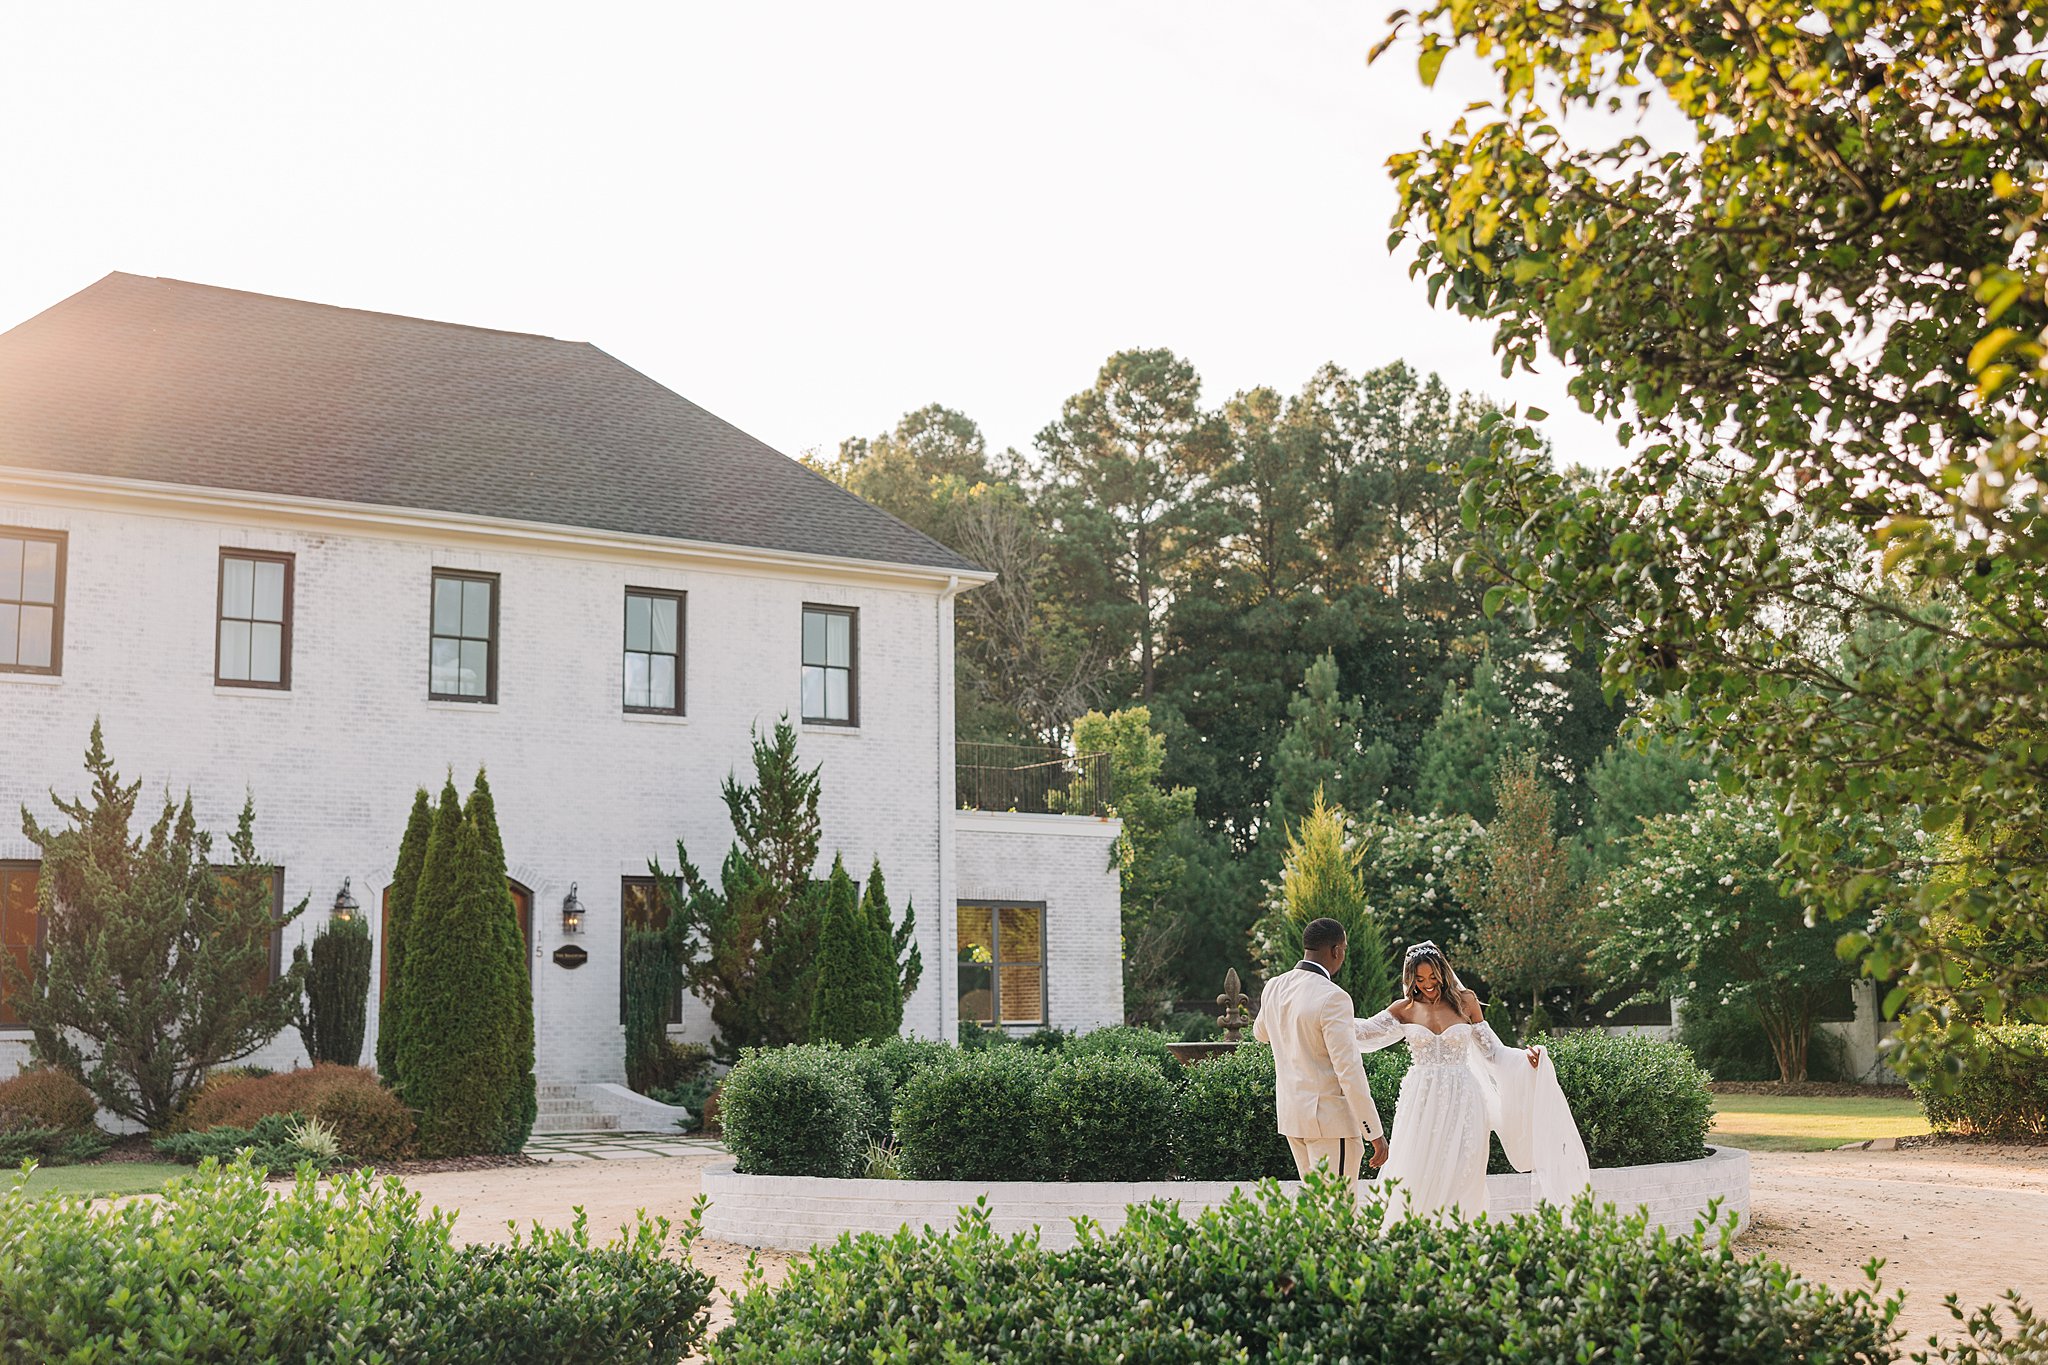 Newlyweds dance in a garden patio at sunset at the bradford wedding venue